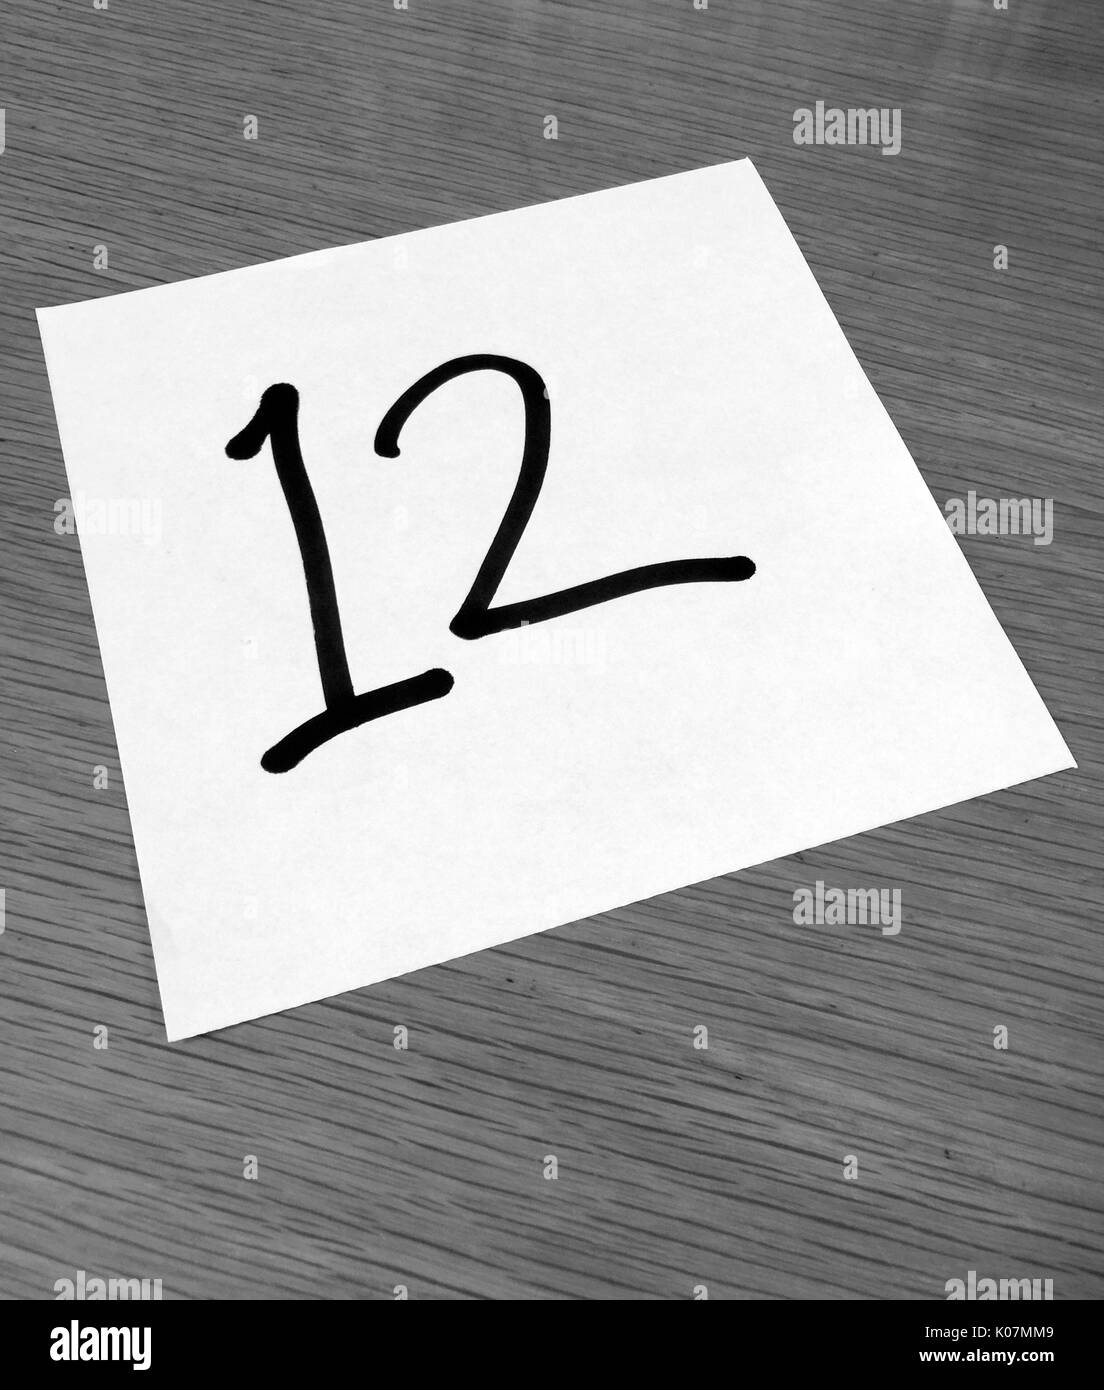 Piece of paper on a desk with a large number 12 Stock Photo